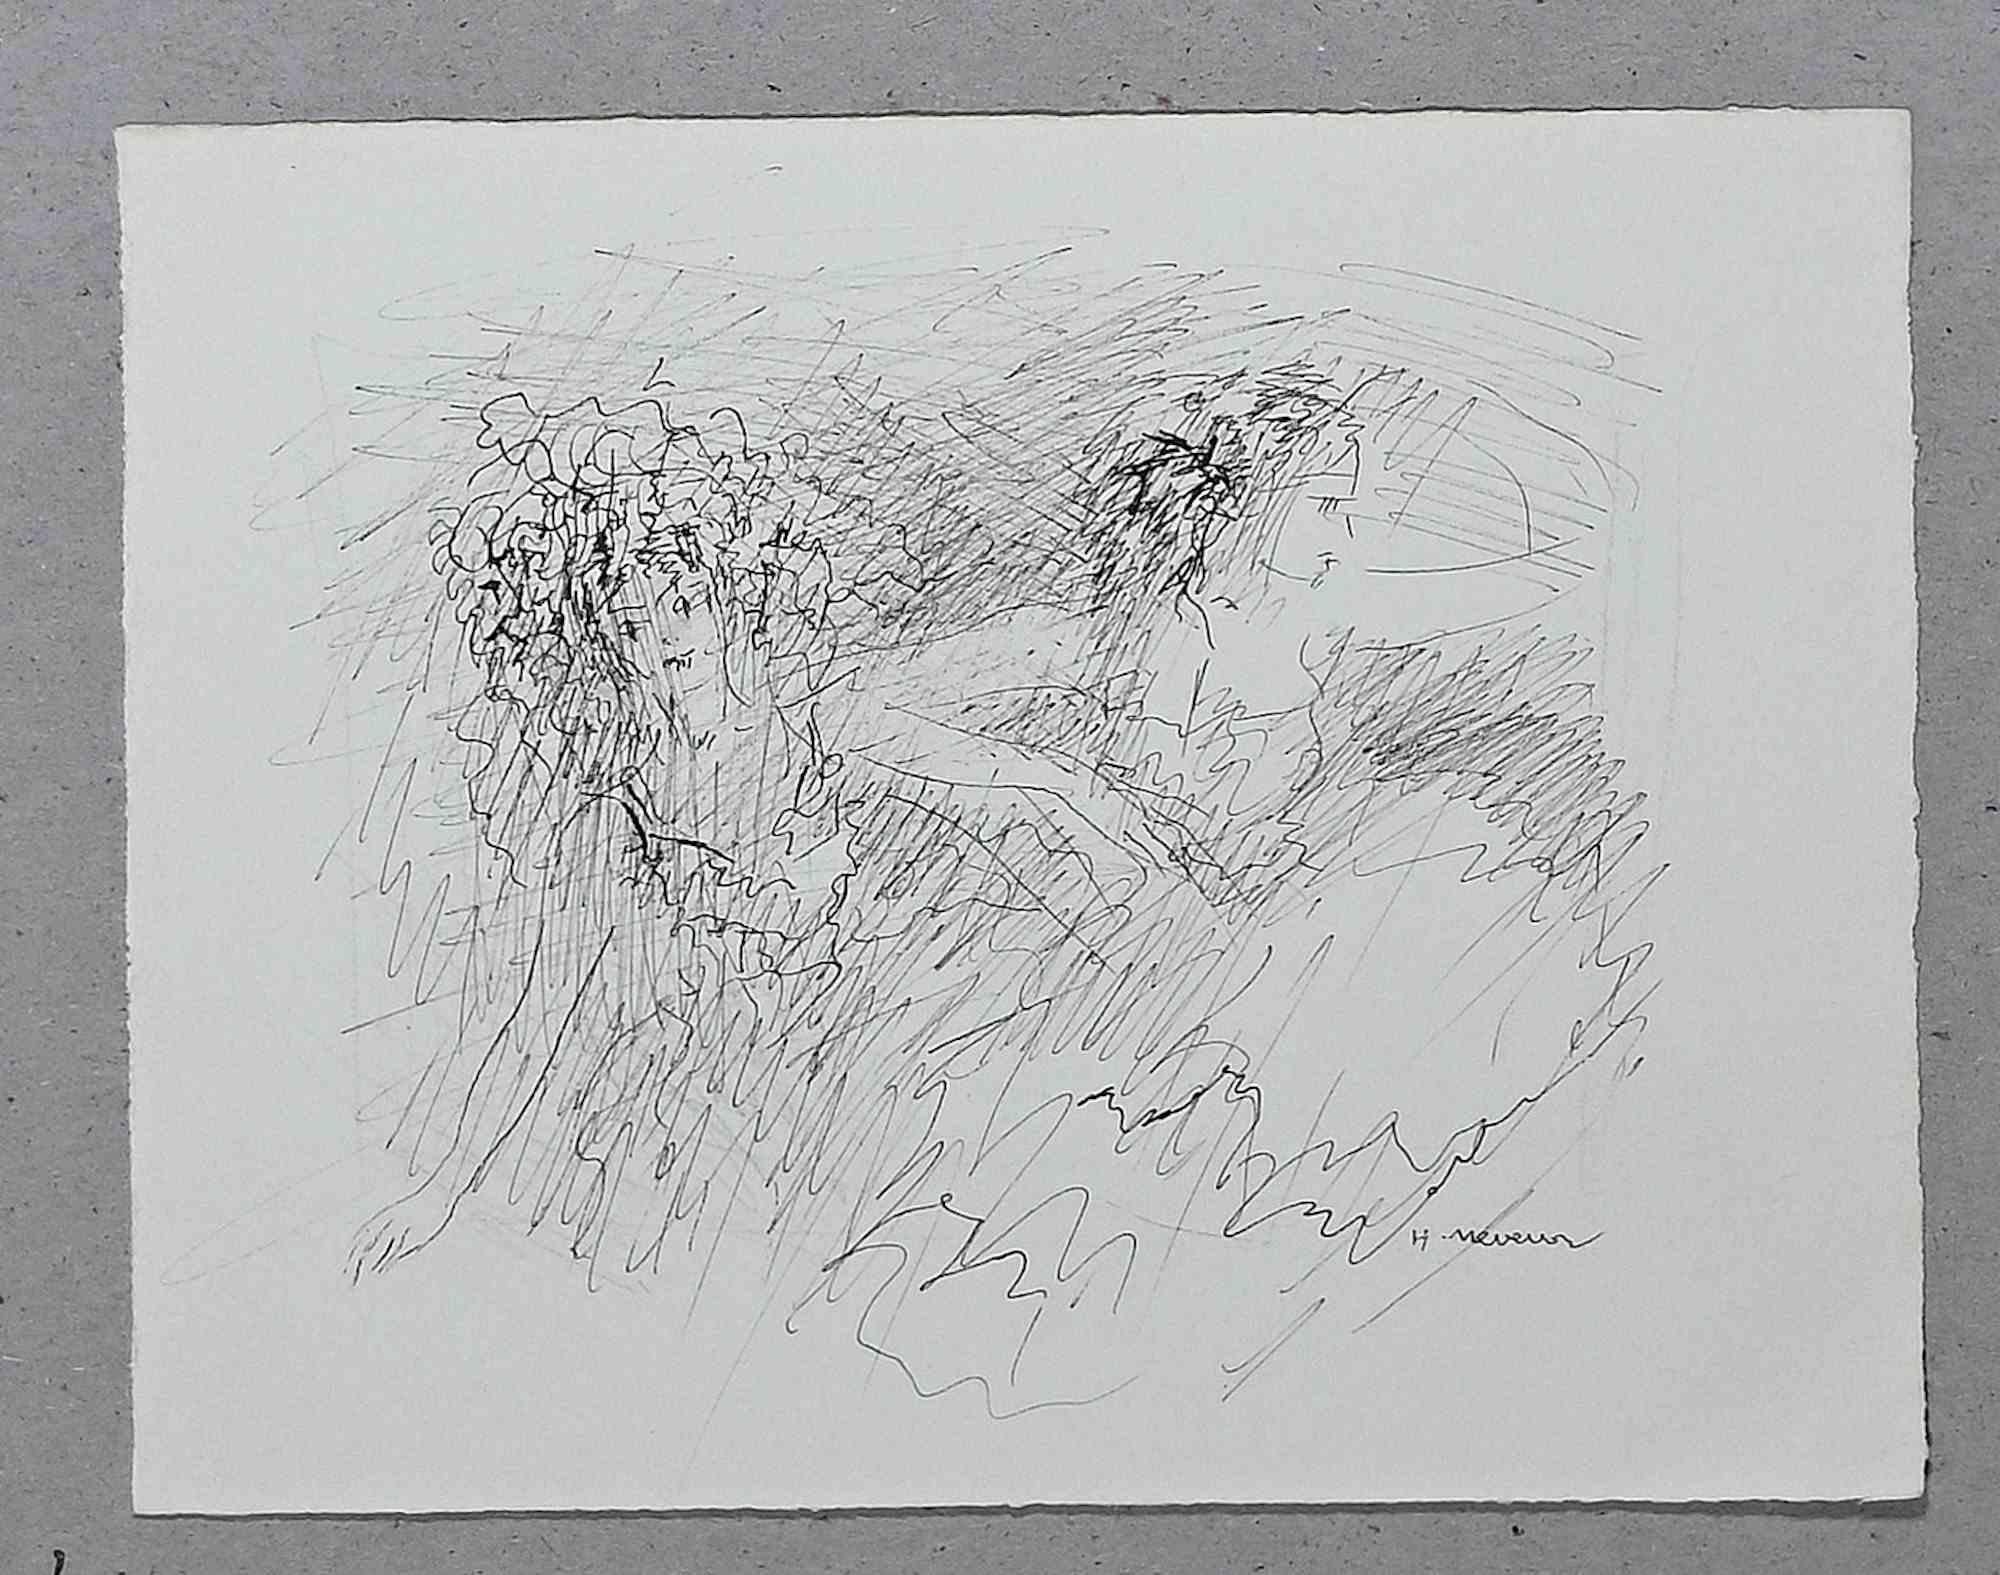 Sketch in The Garden is an original drawing in China Ink by Hélène Neveur in the mid-20th Century.

Good conditions.

The artwork is depicted through strong strokes in a well-balanced composition.